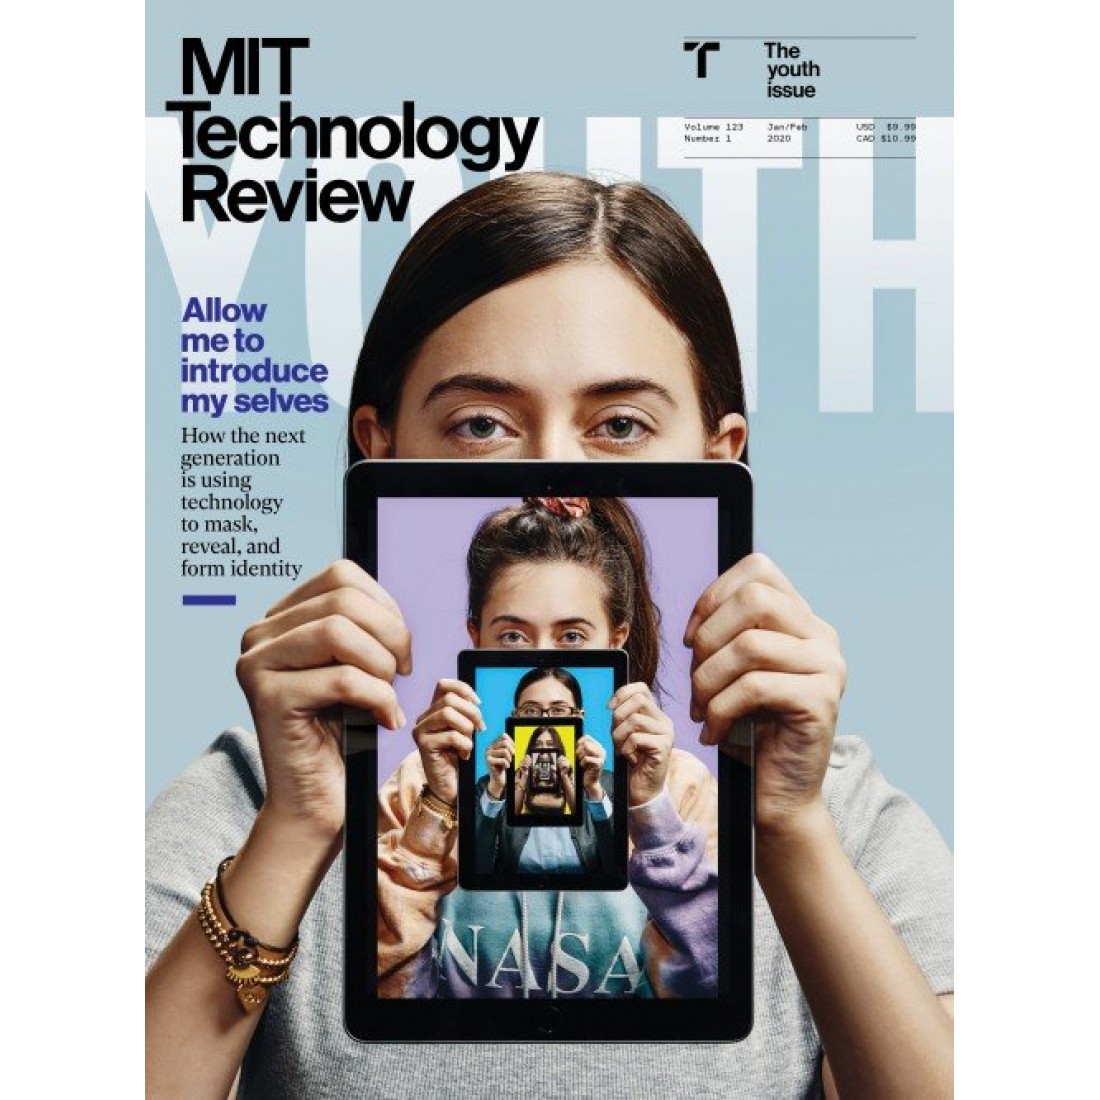 Give a Gift of MIT Technology Review Magazine subscription. Only 55.95!